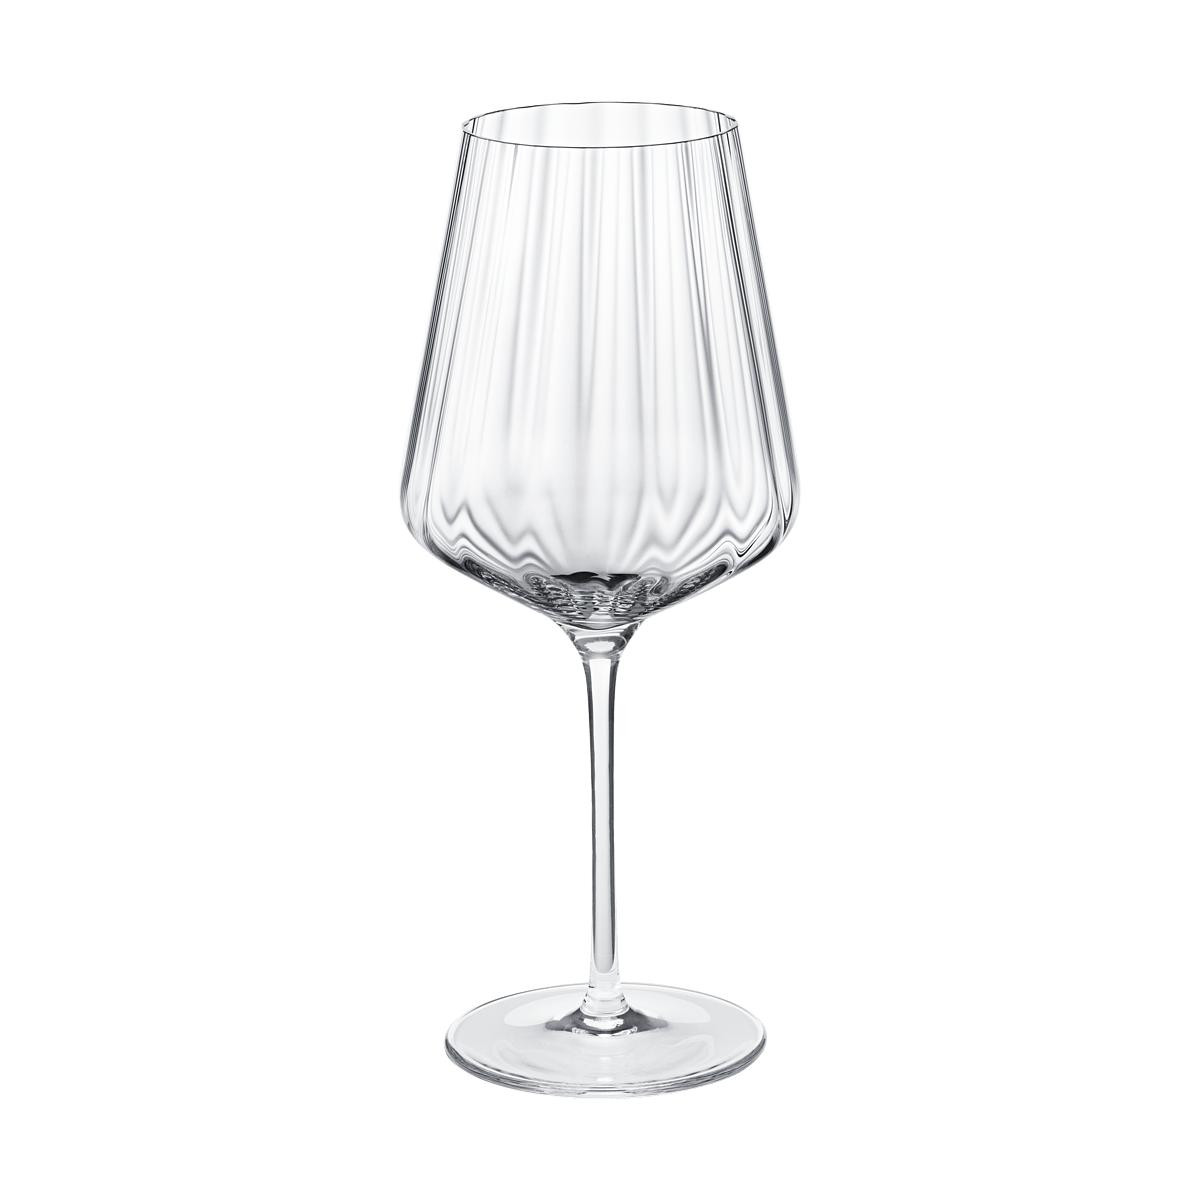 https://www.thepinkdaisy.com/wp-content/uploads/2021/05/pack__10019229_BERNADOTTE_WHITE_WINE_GLASS_CRYSTALINE_43CL_01.png